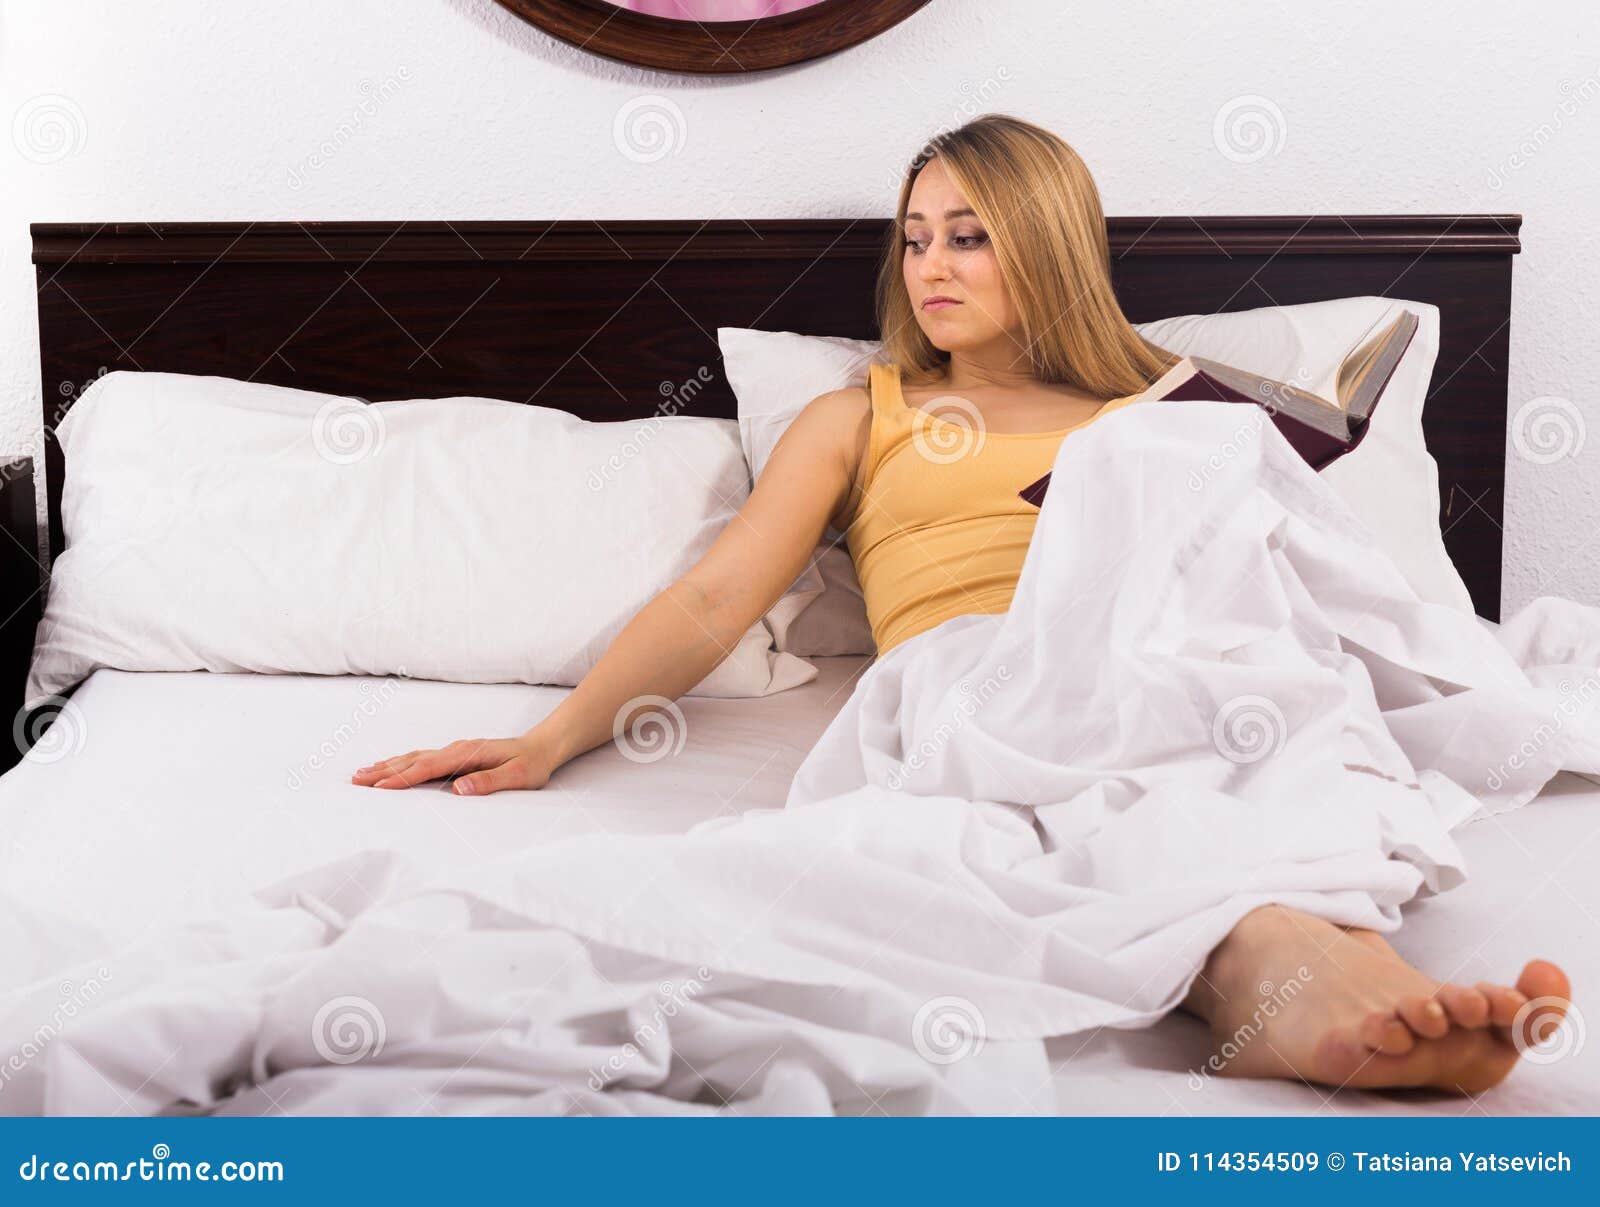 Girl Waiting For Her Husband Alone On Bed Stock Image Image Of Face